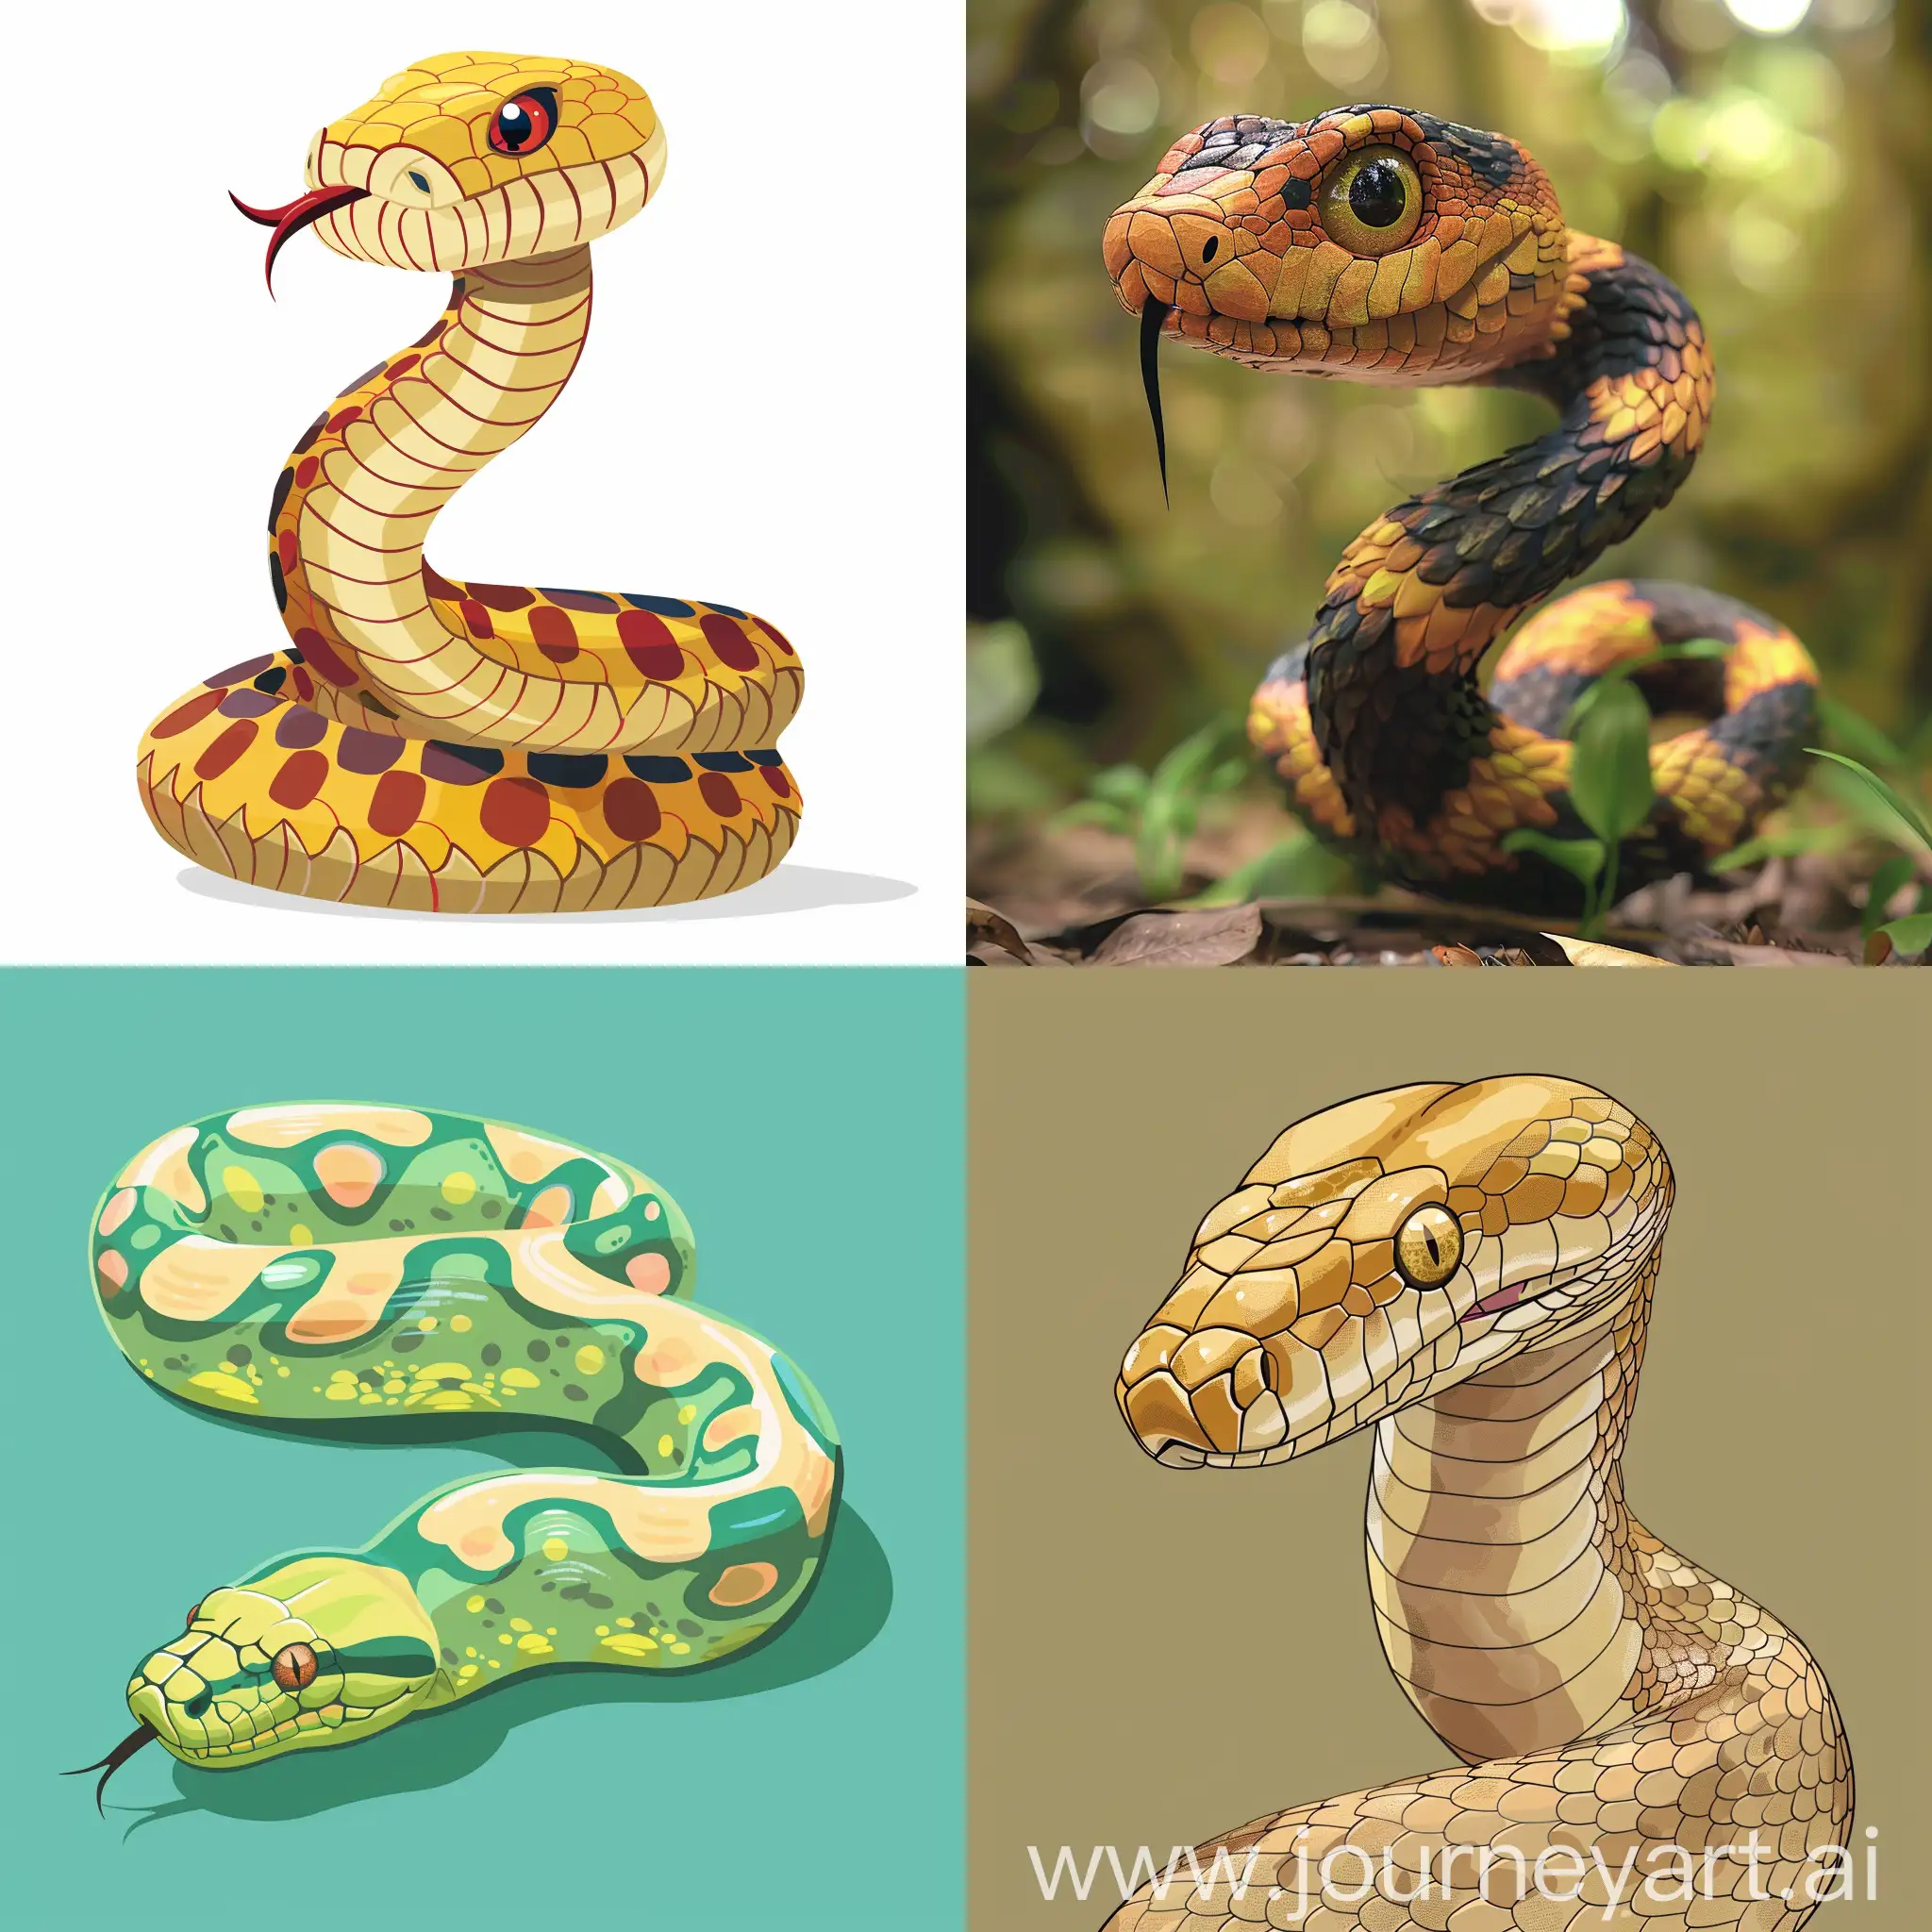 Colorful-Cartoon-Snake-Coiling-Up-in-Playful-Animation